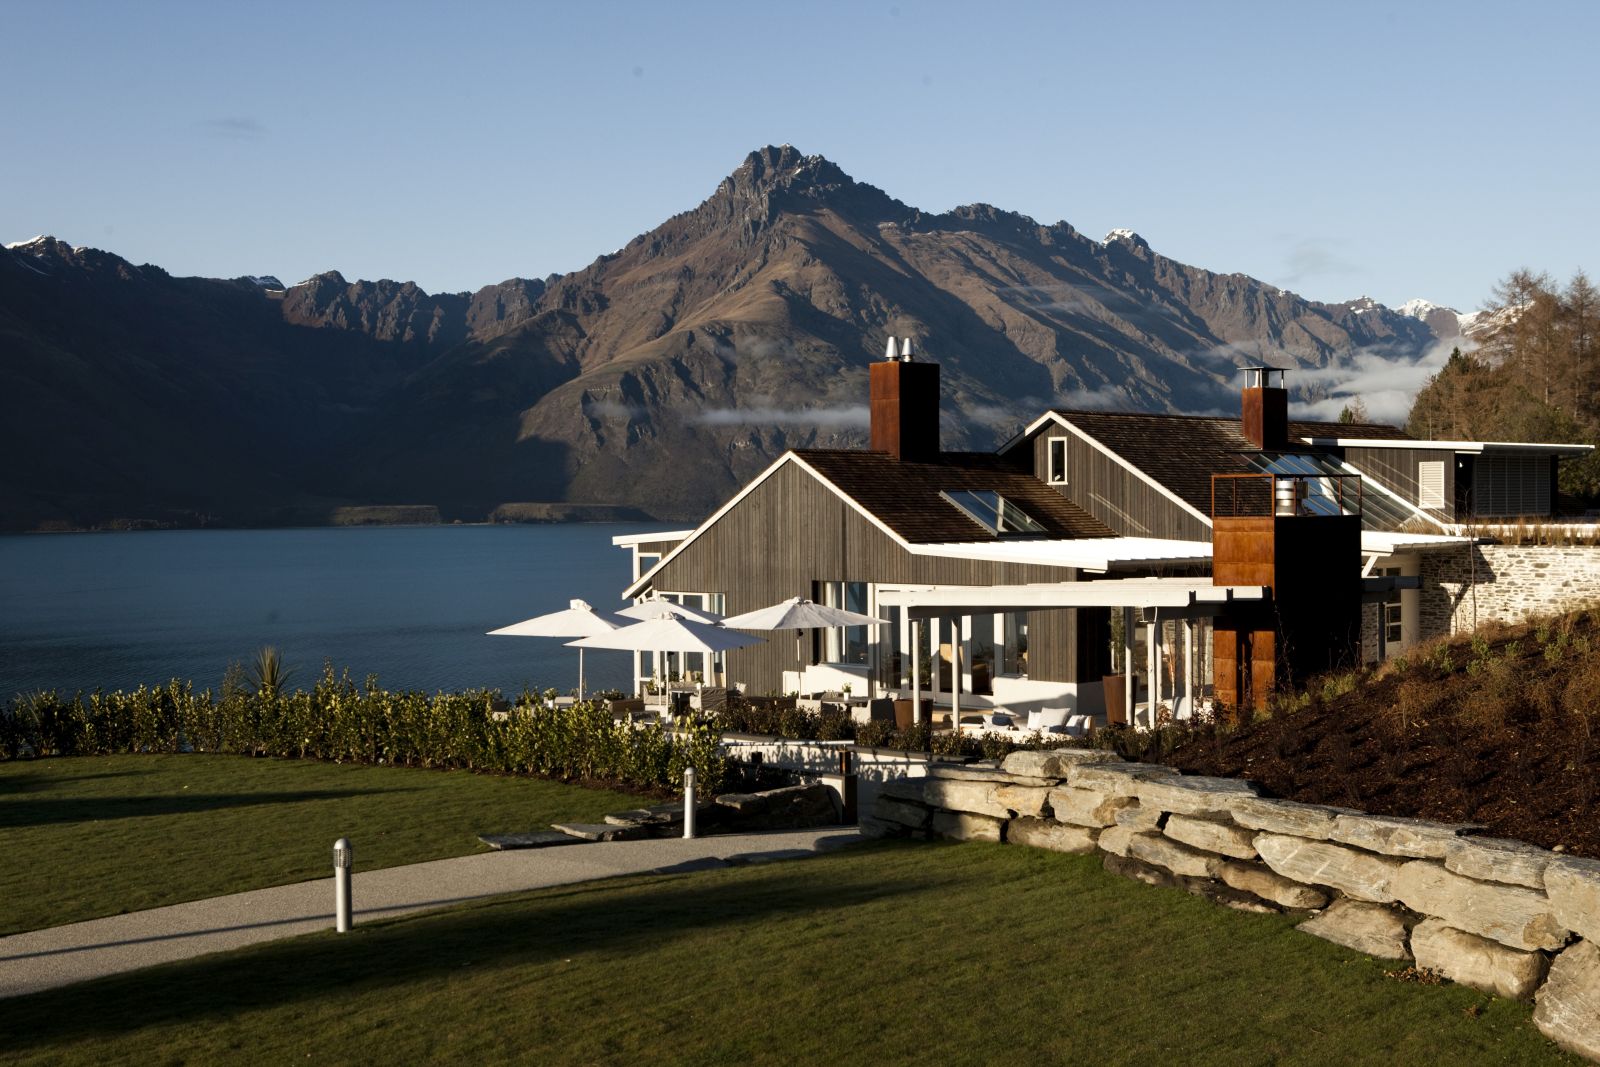 Matakauri Lodge exterior with views of the mountains